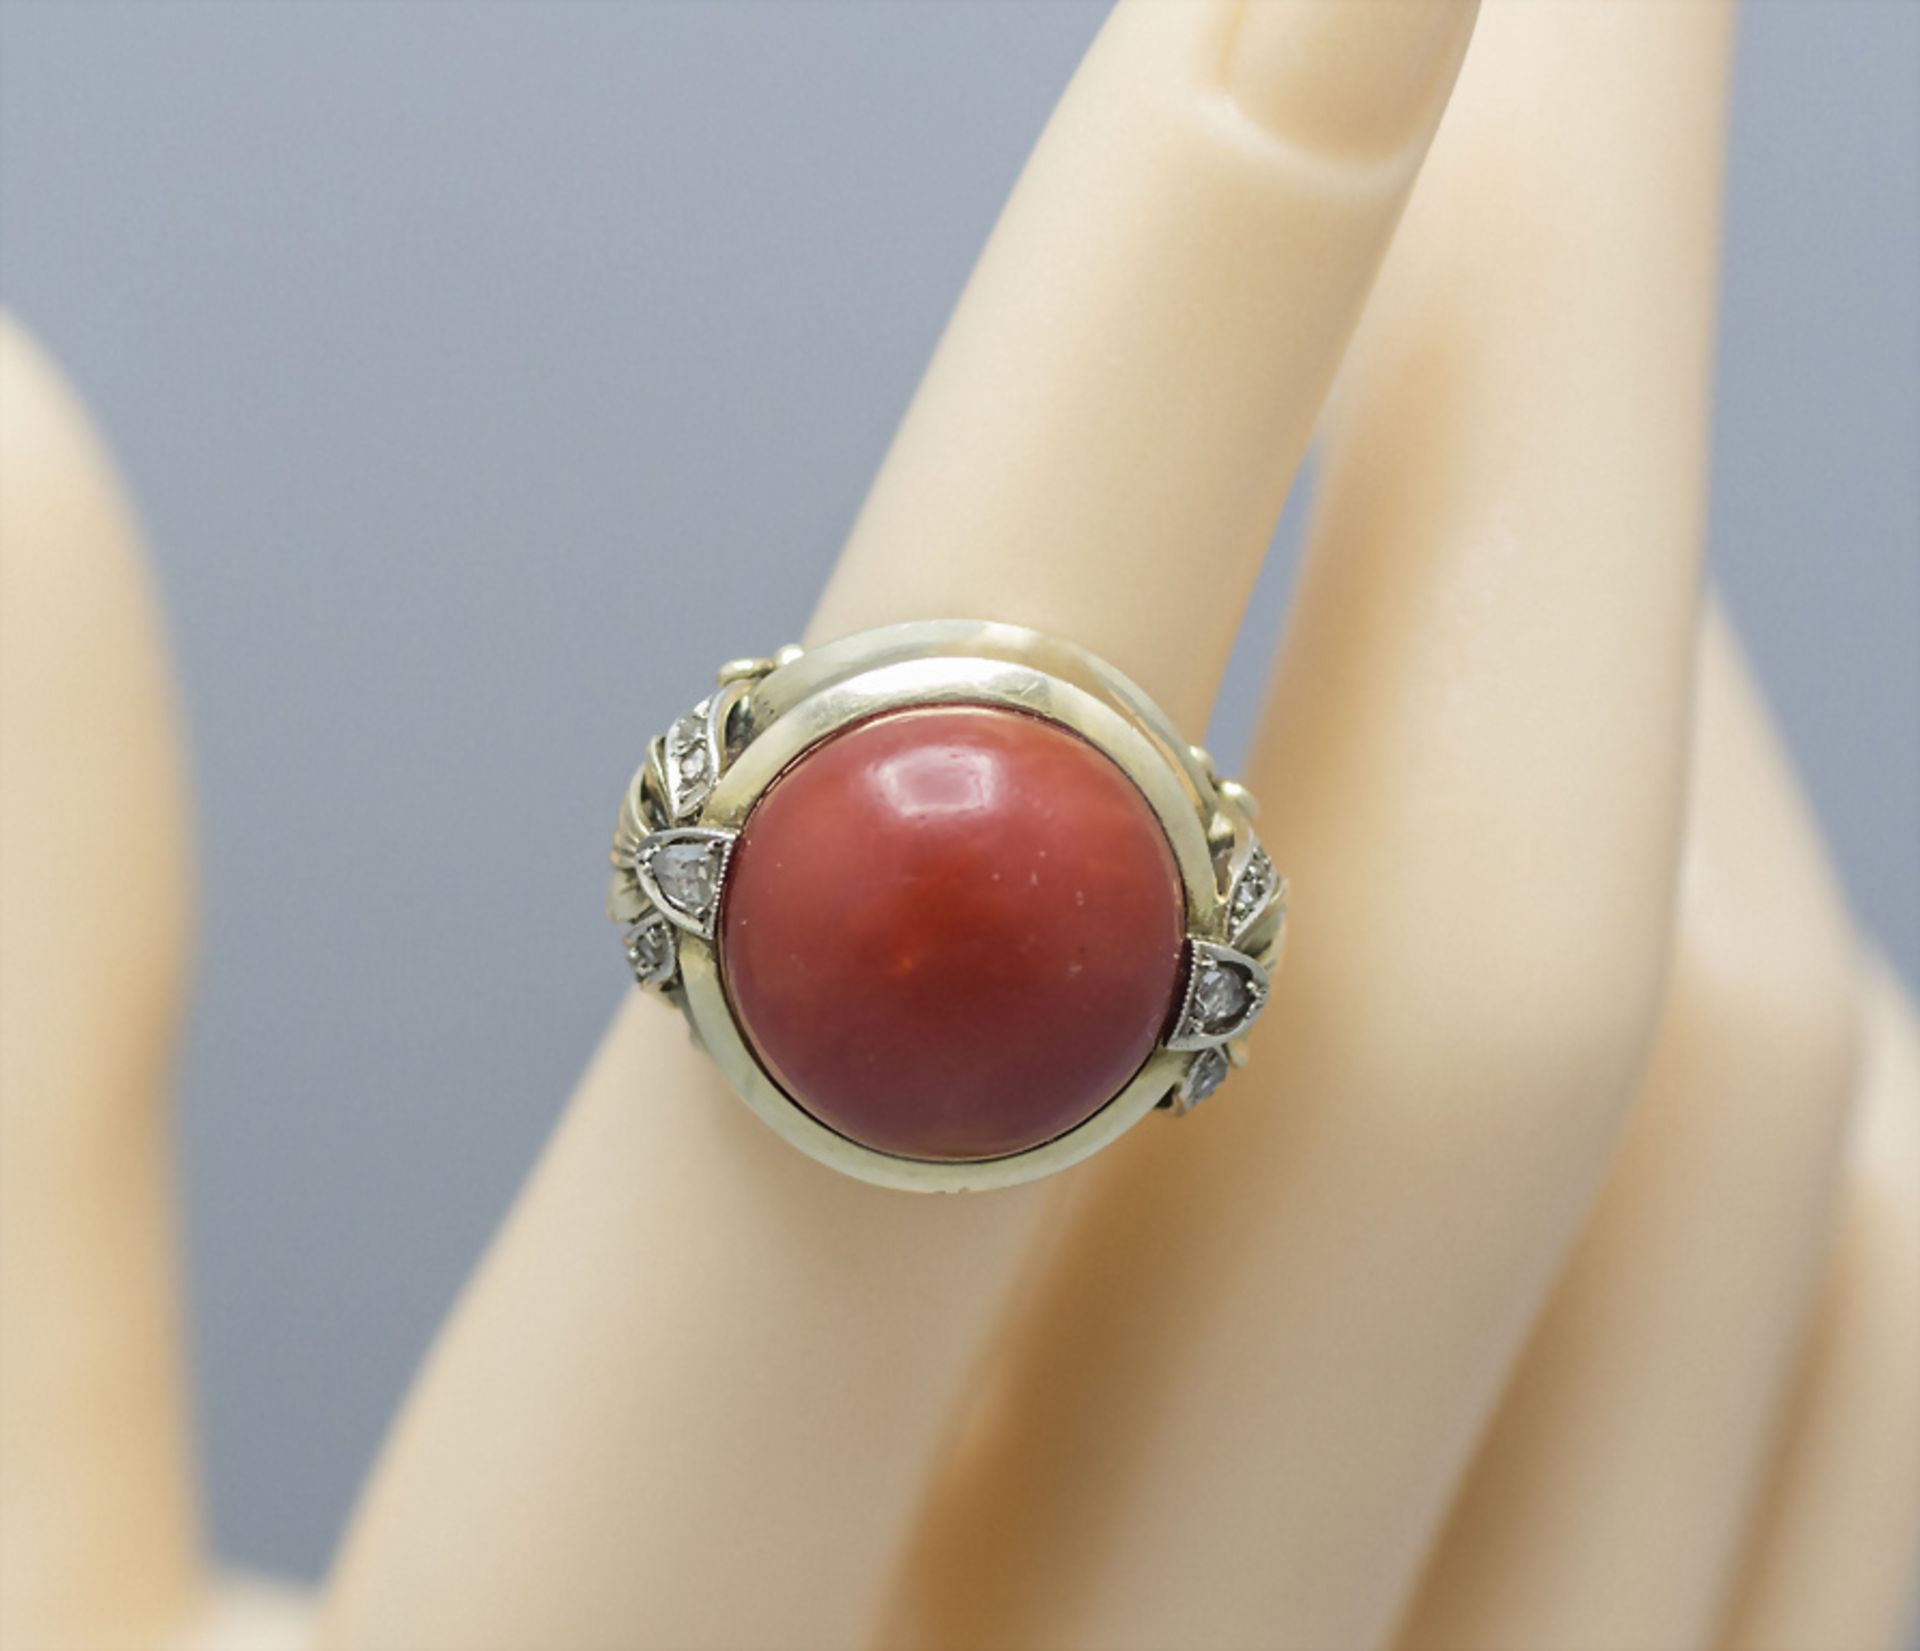 Damenring mit Korall-Cabochon / A 14 ct ladies gold ring with coral cabochon